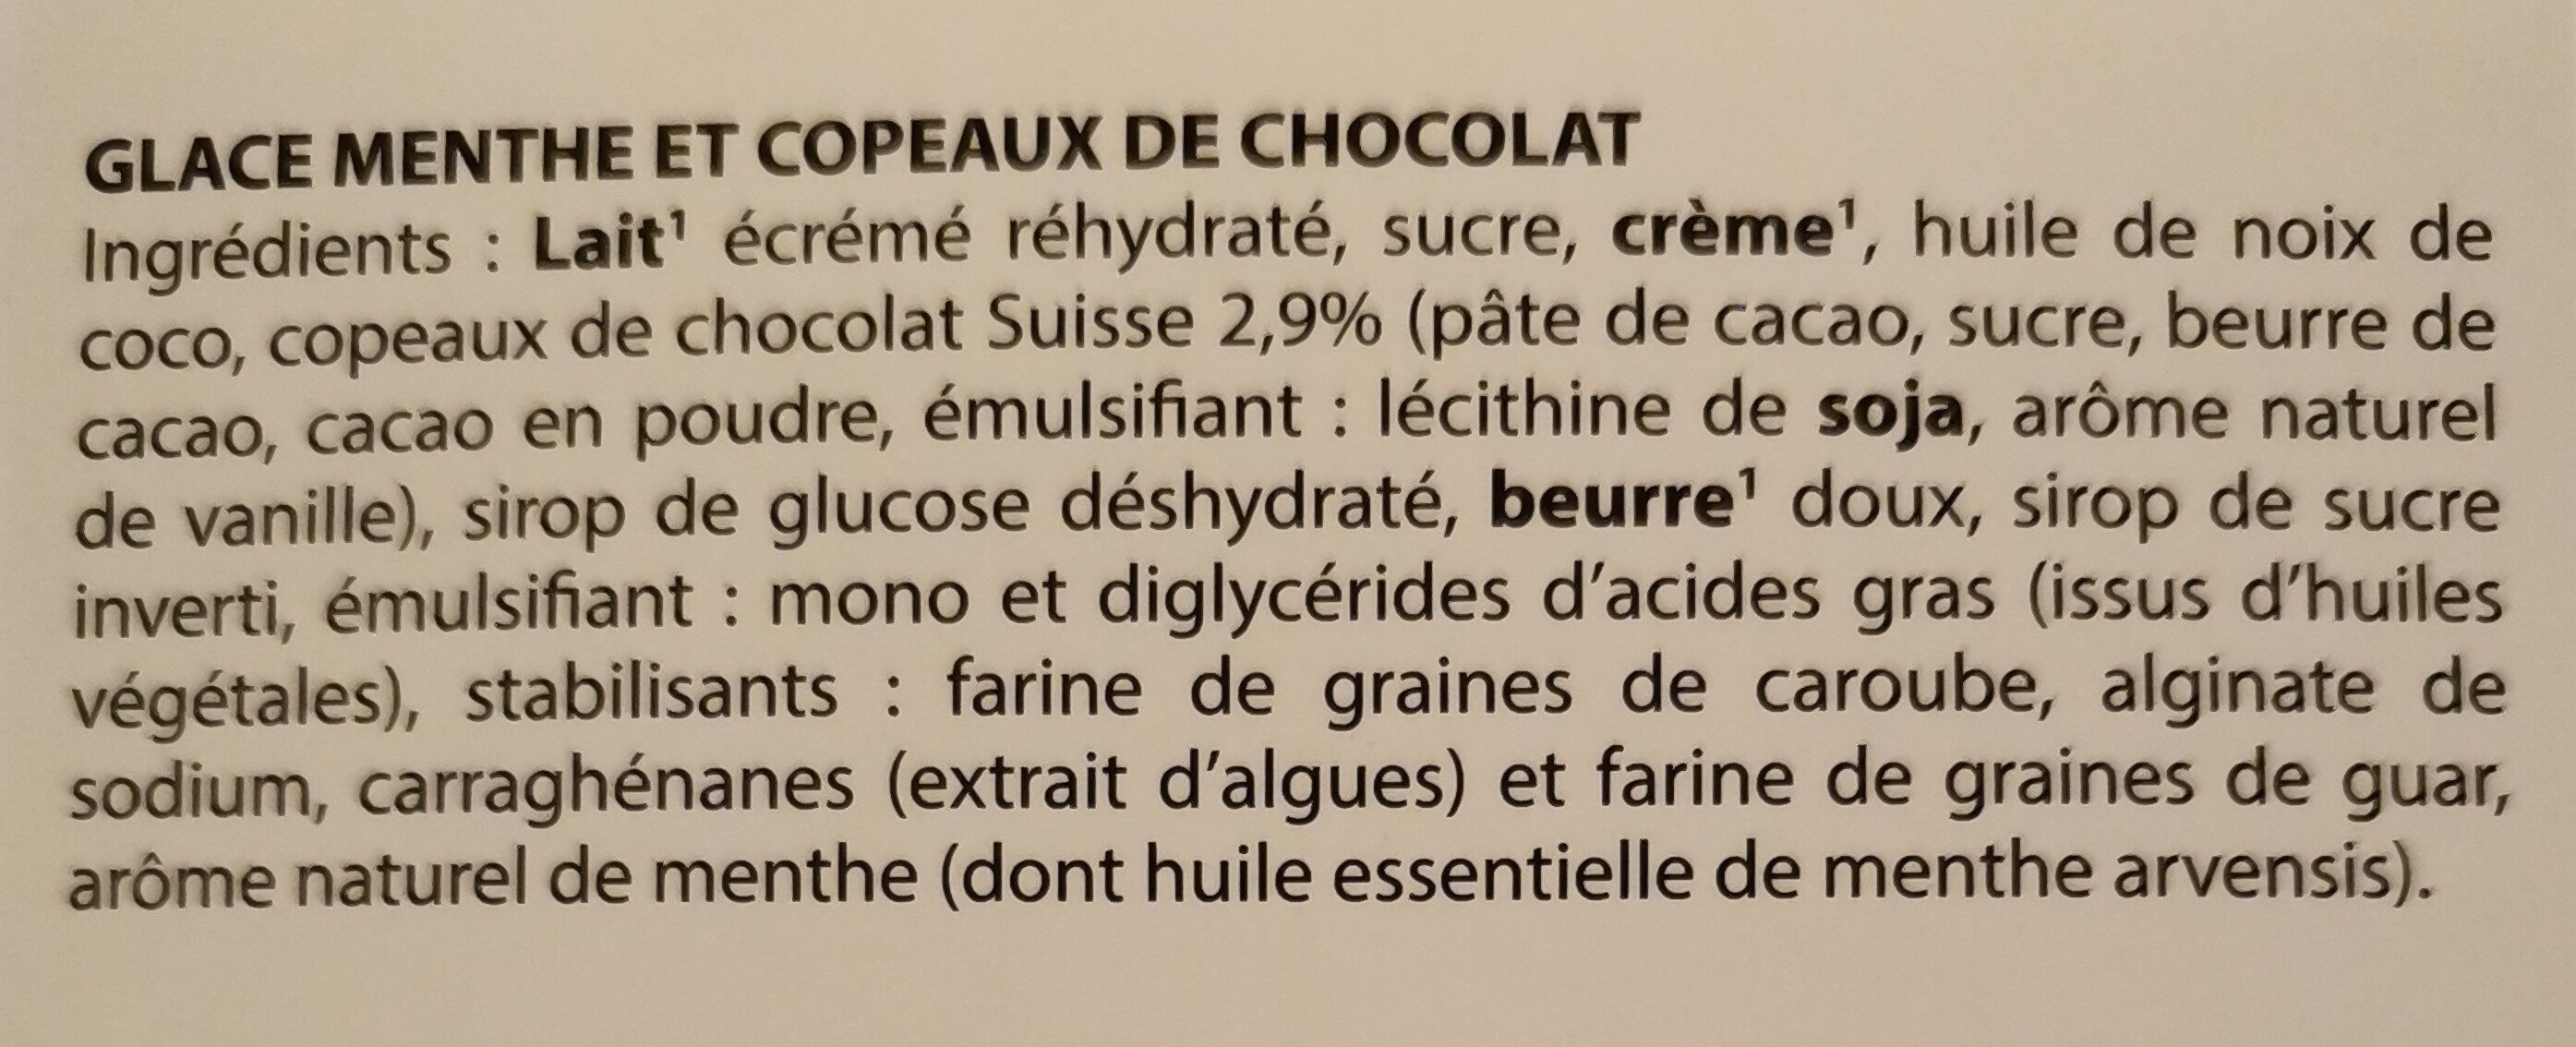 Glace menthe forte - Ingredients - fr